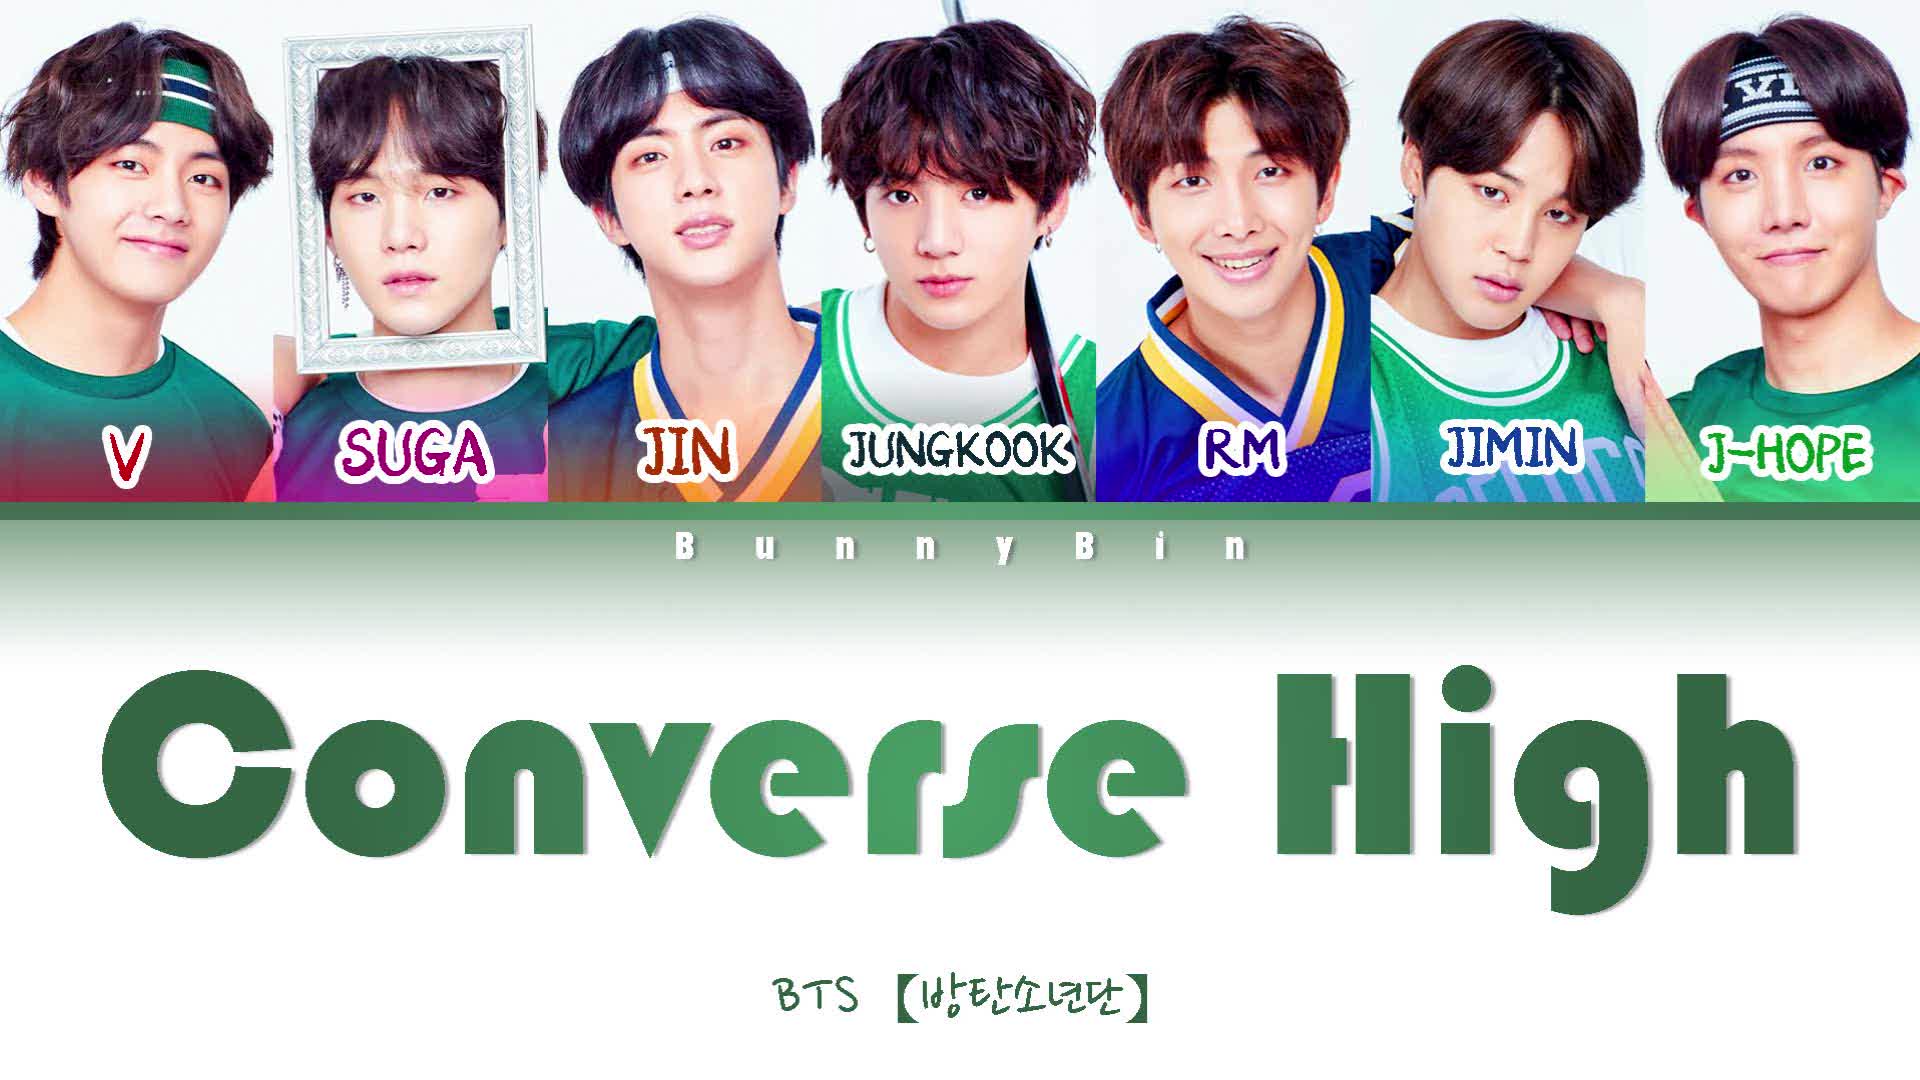 converse high bts color coded